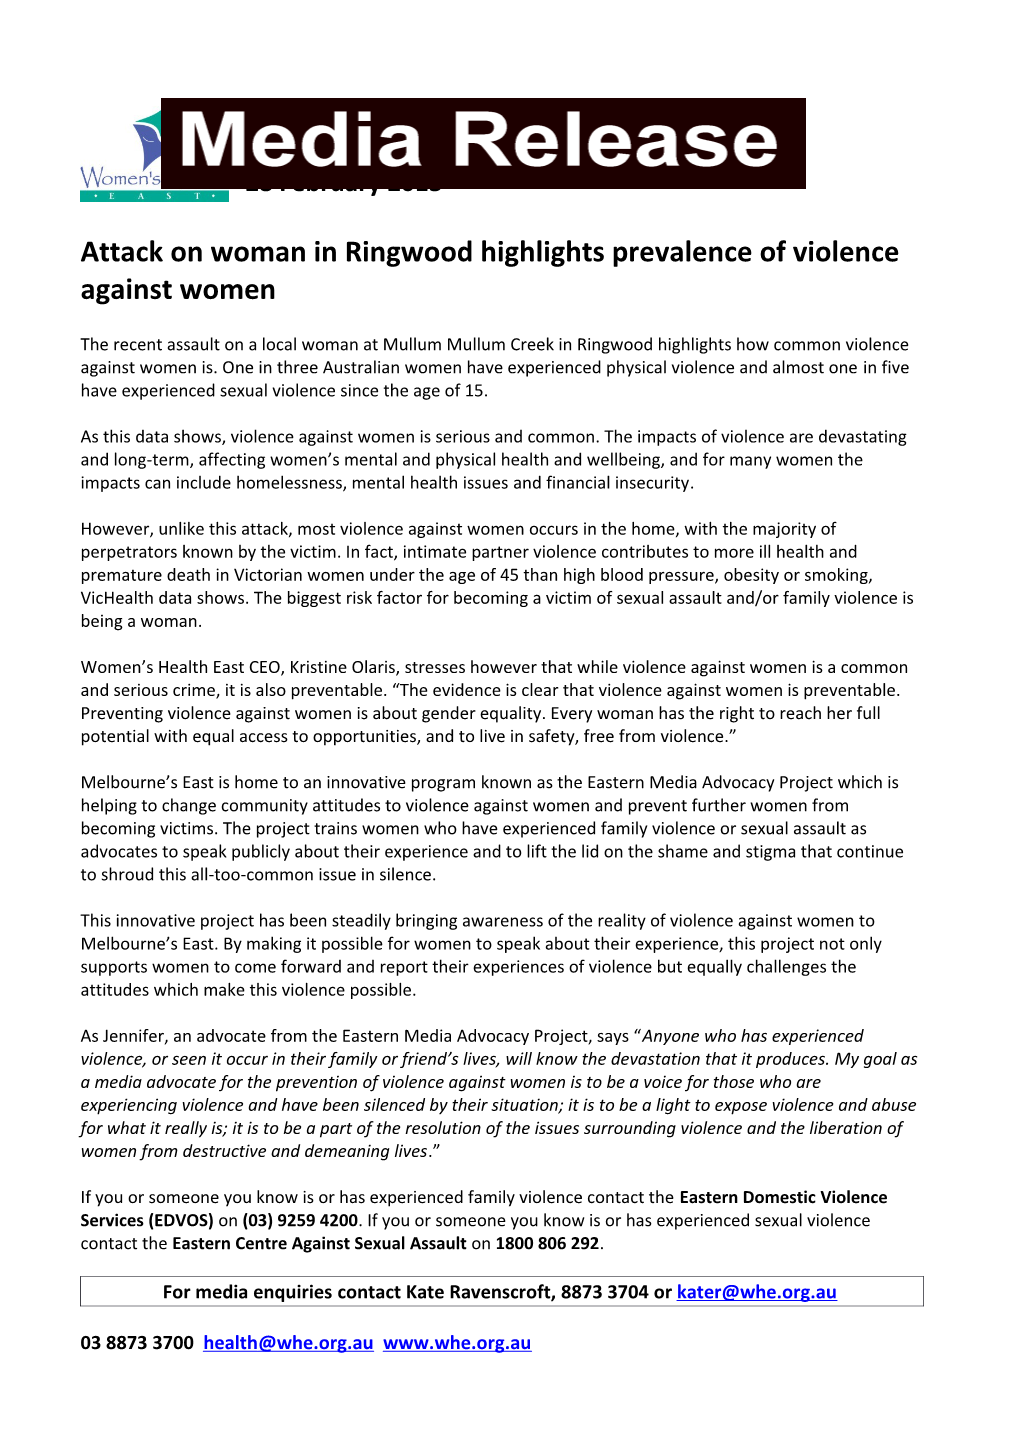 Attack on Woman in Ringwood Highlights Prevalence of Violence Against Women